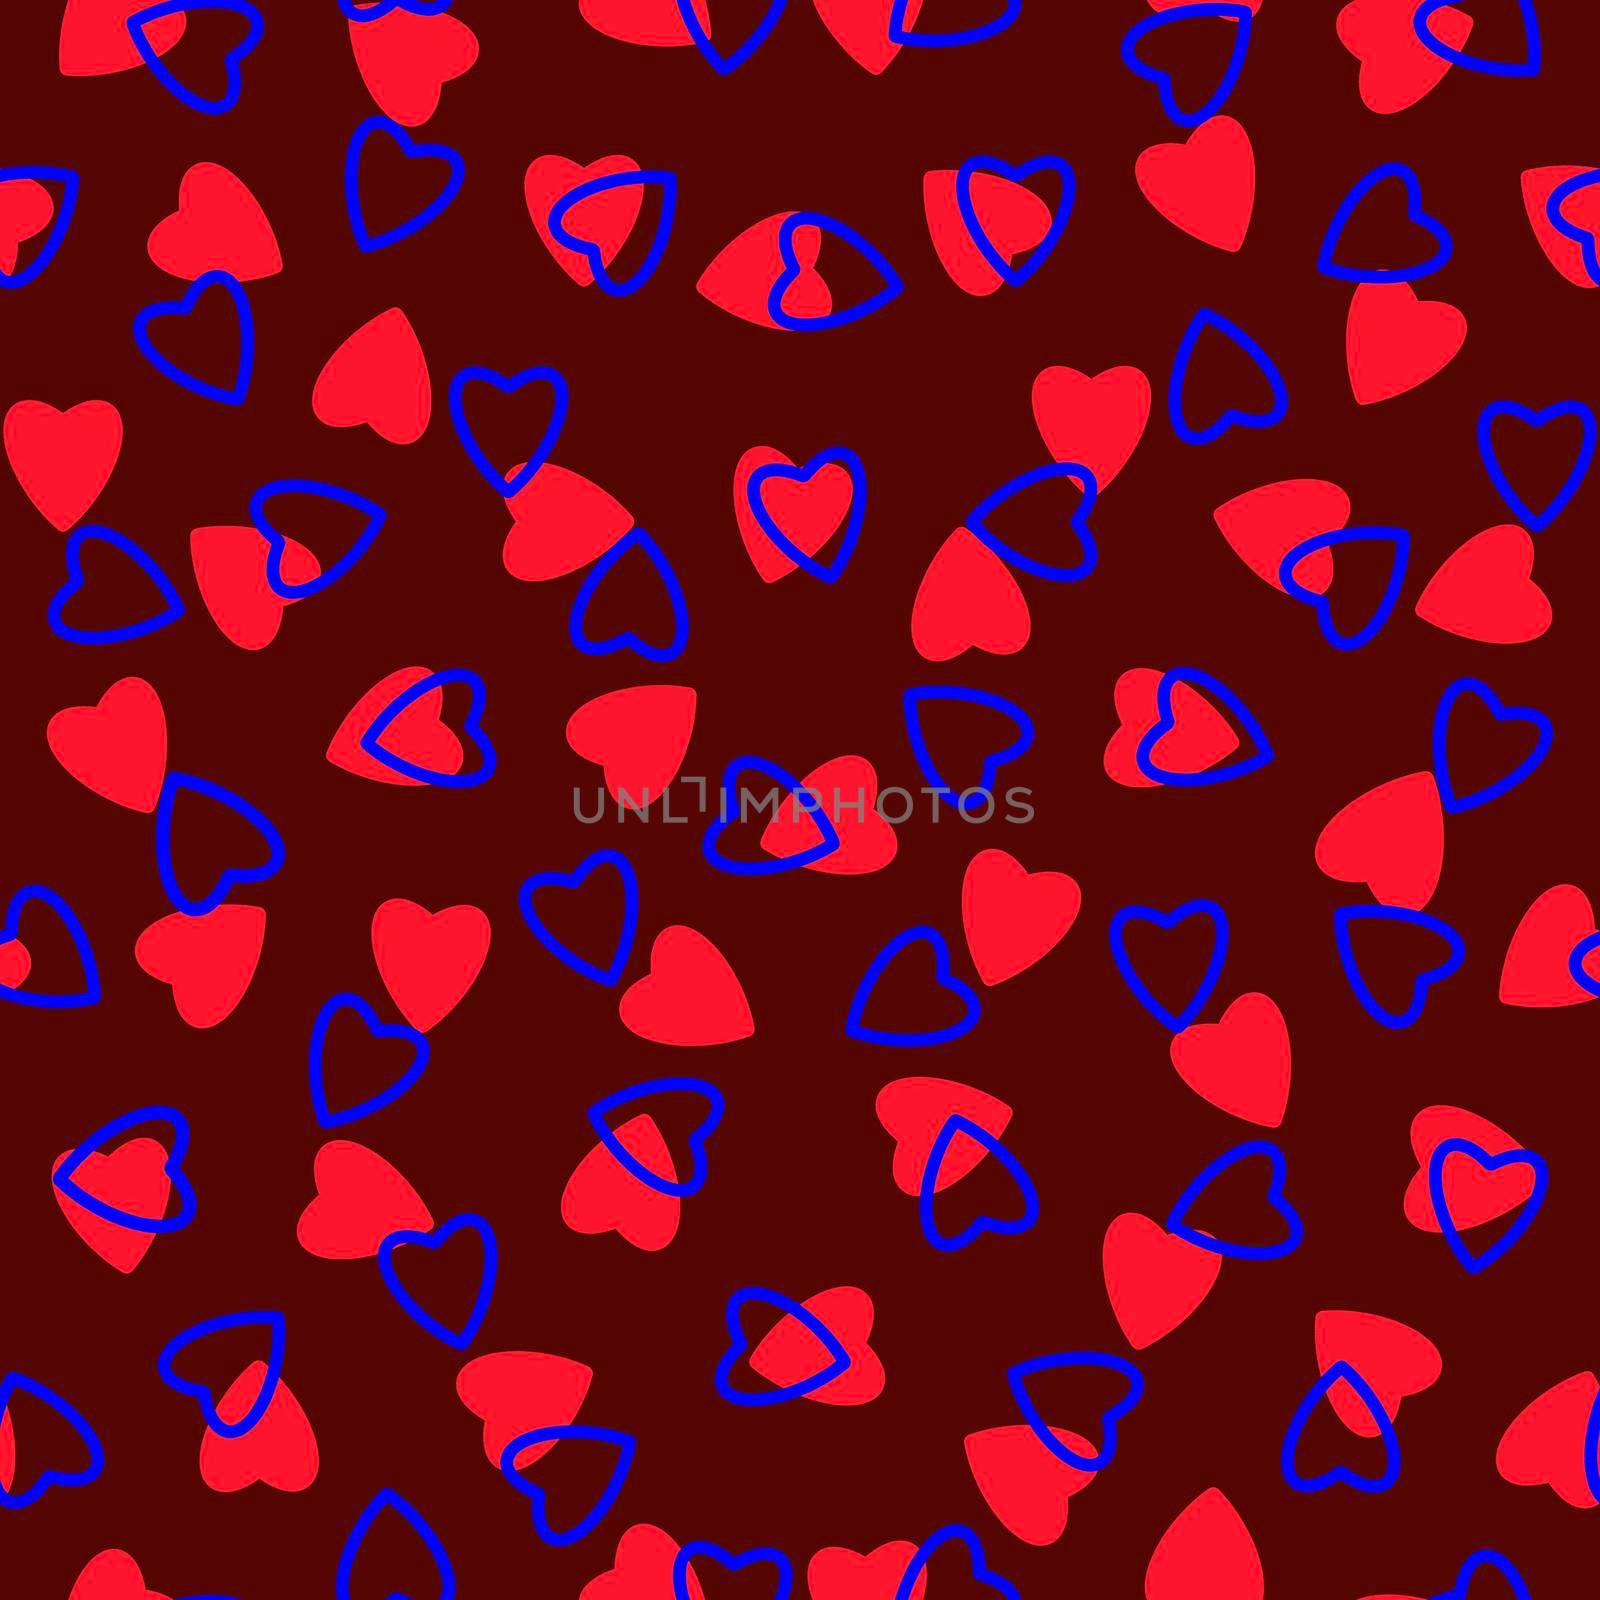 Simple heart seamless pattern,endless chaotic texture made of tiny heart silhouettes.Valentines,mothers day background.Great for Easter,wedding,scrapbook,gift wrapping paper,textiles.Red,blue,burgundy by Angelsmoon